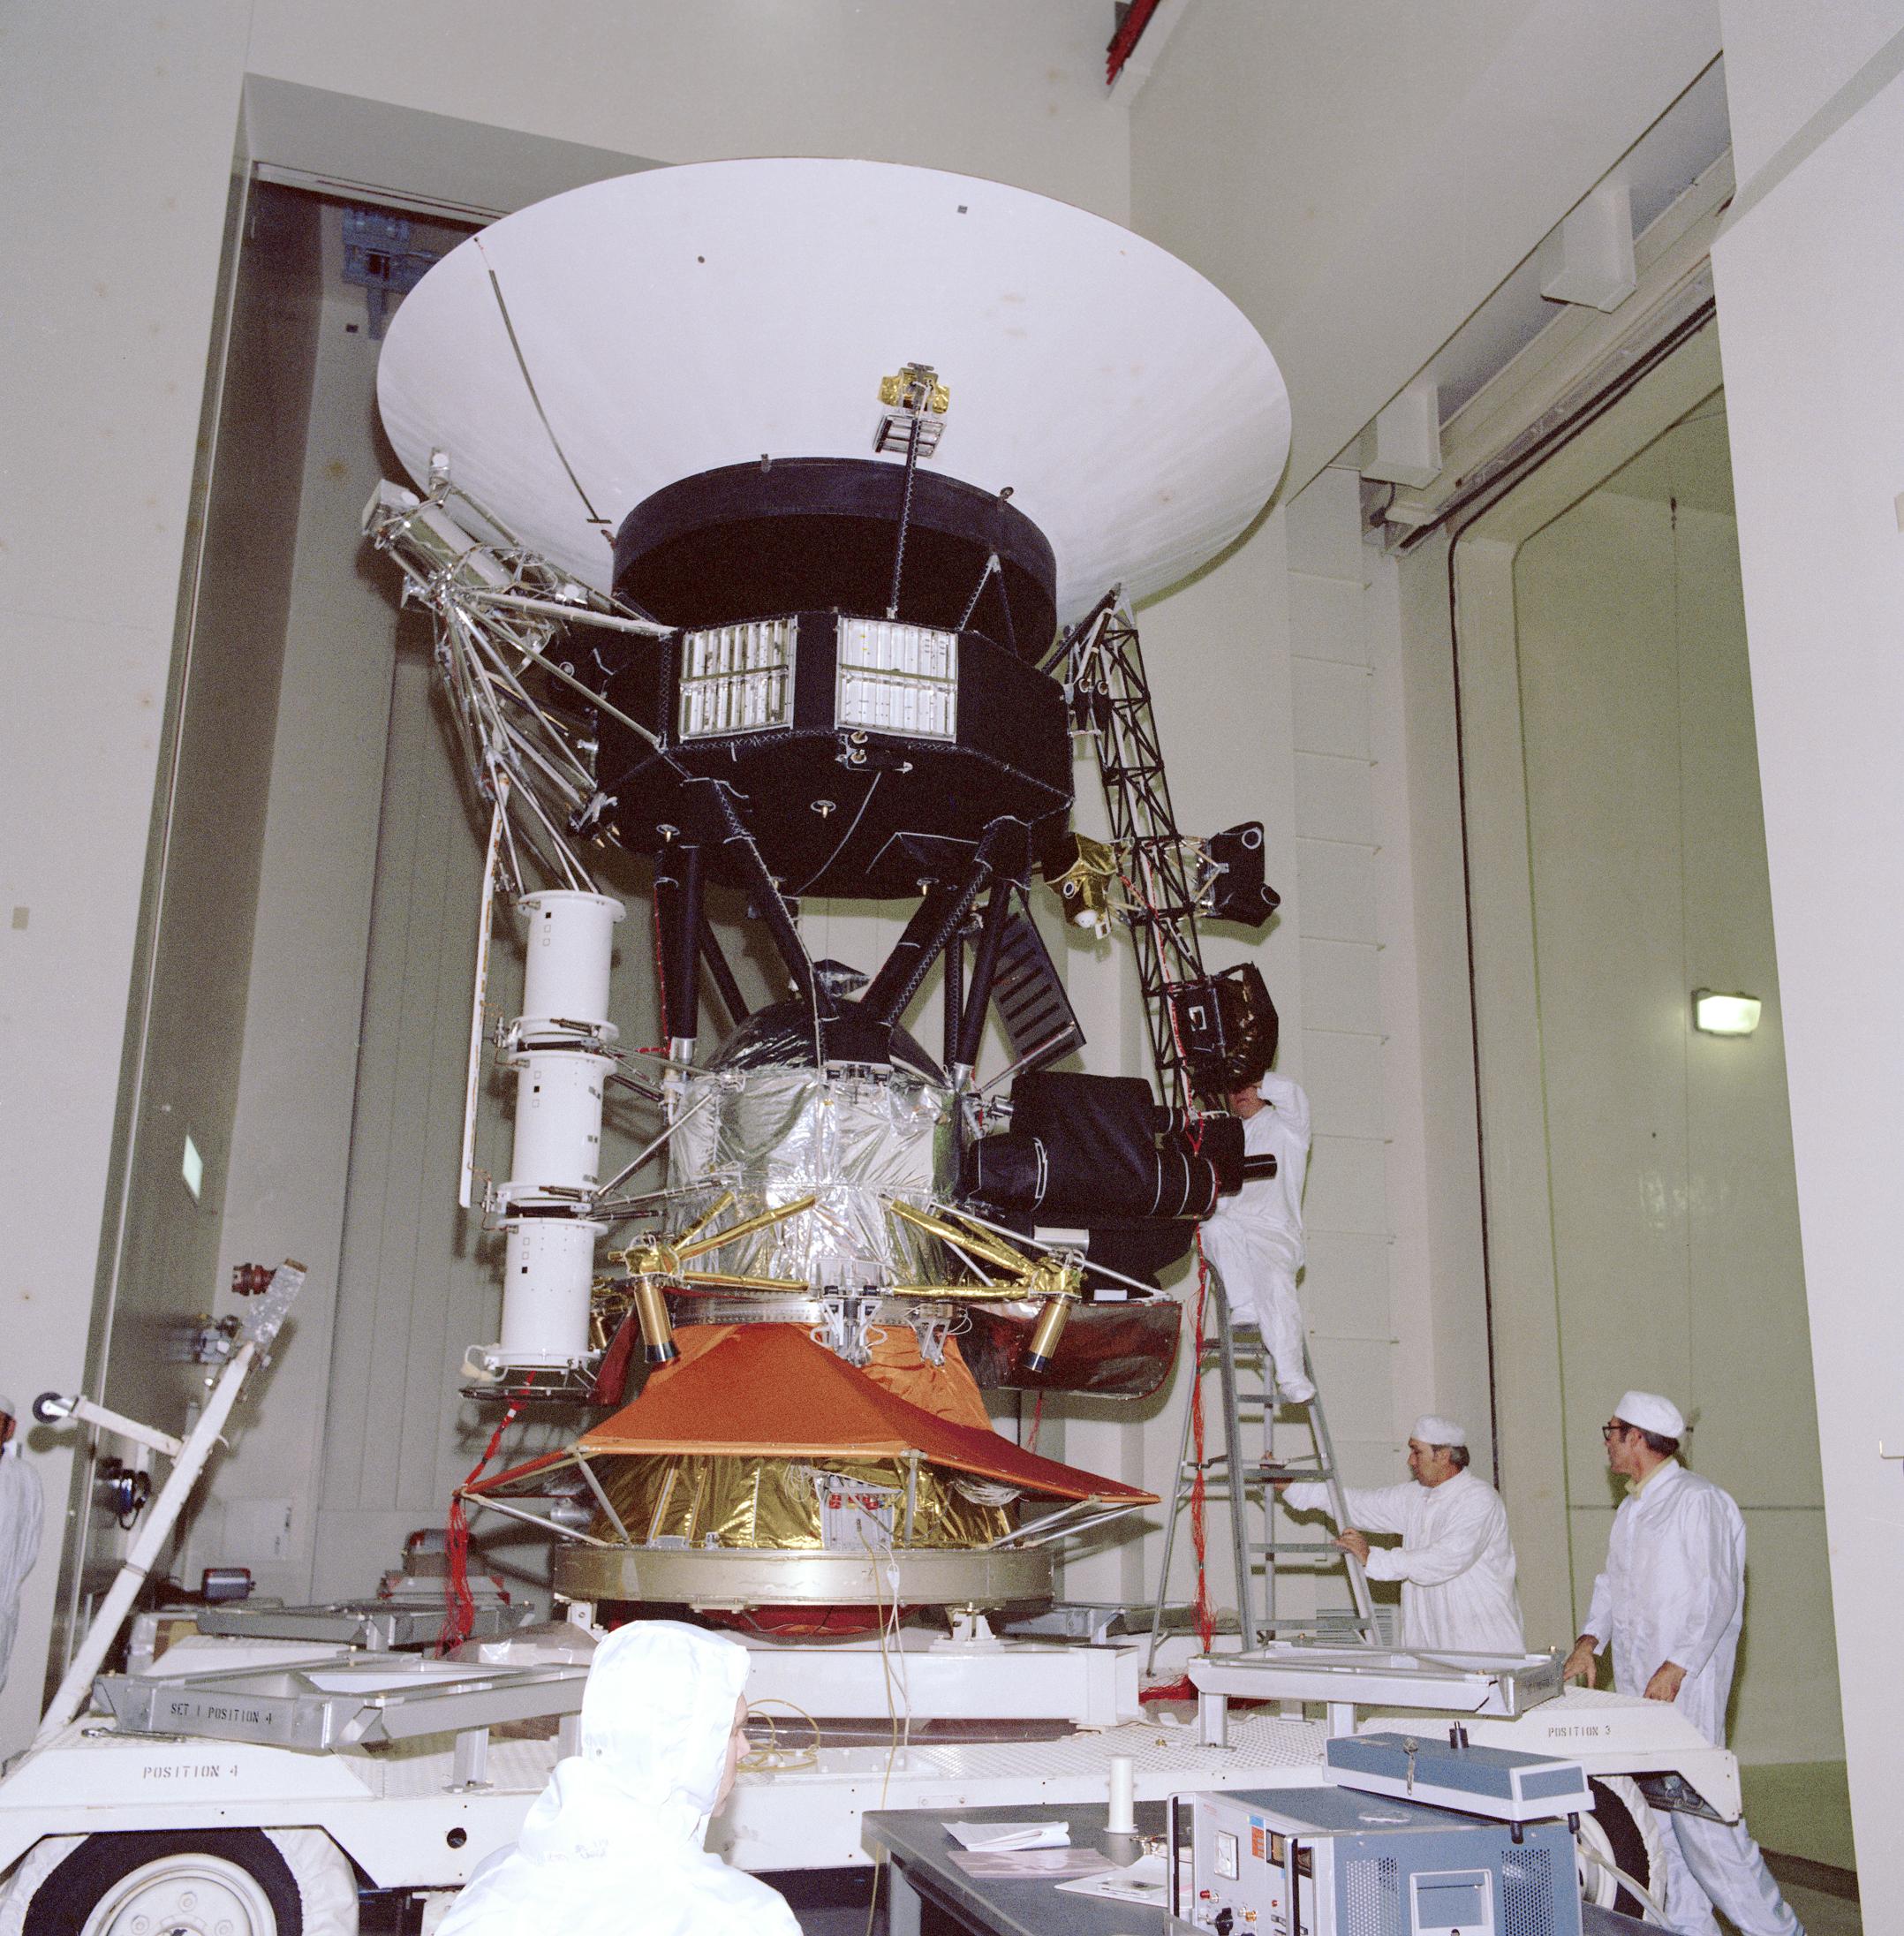 Engineers working on vibration acoustics and pyro shock testing of NASA's Voyager